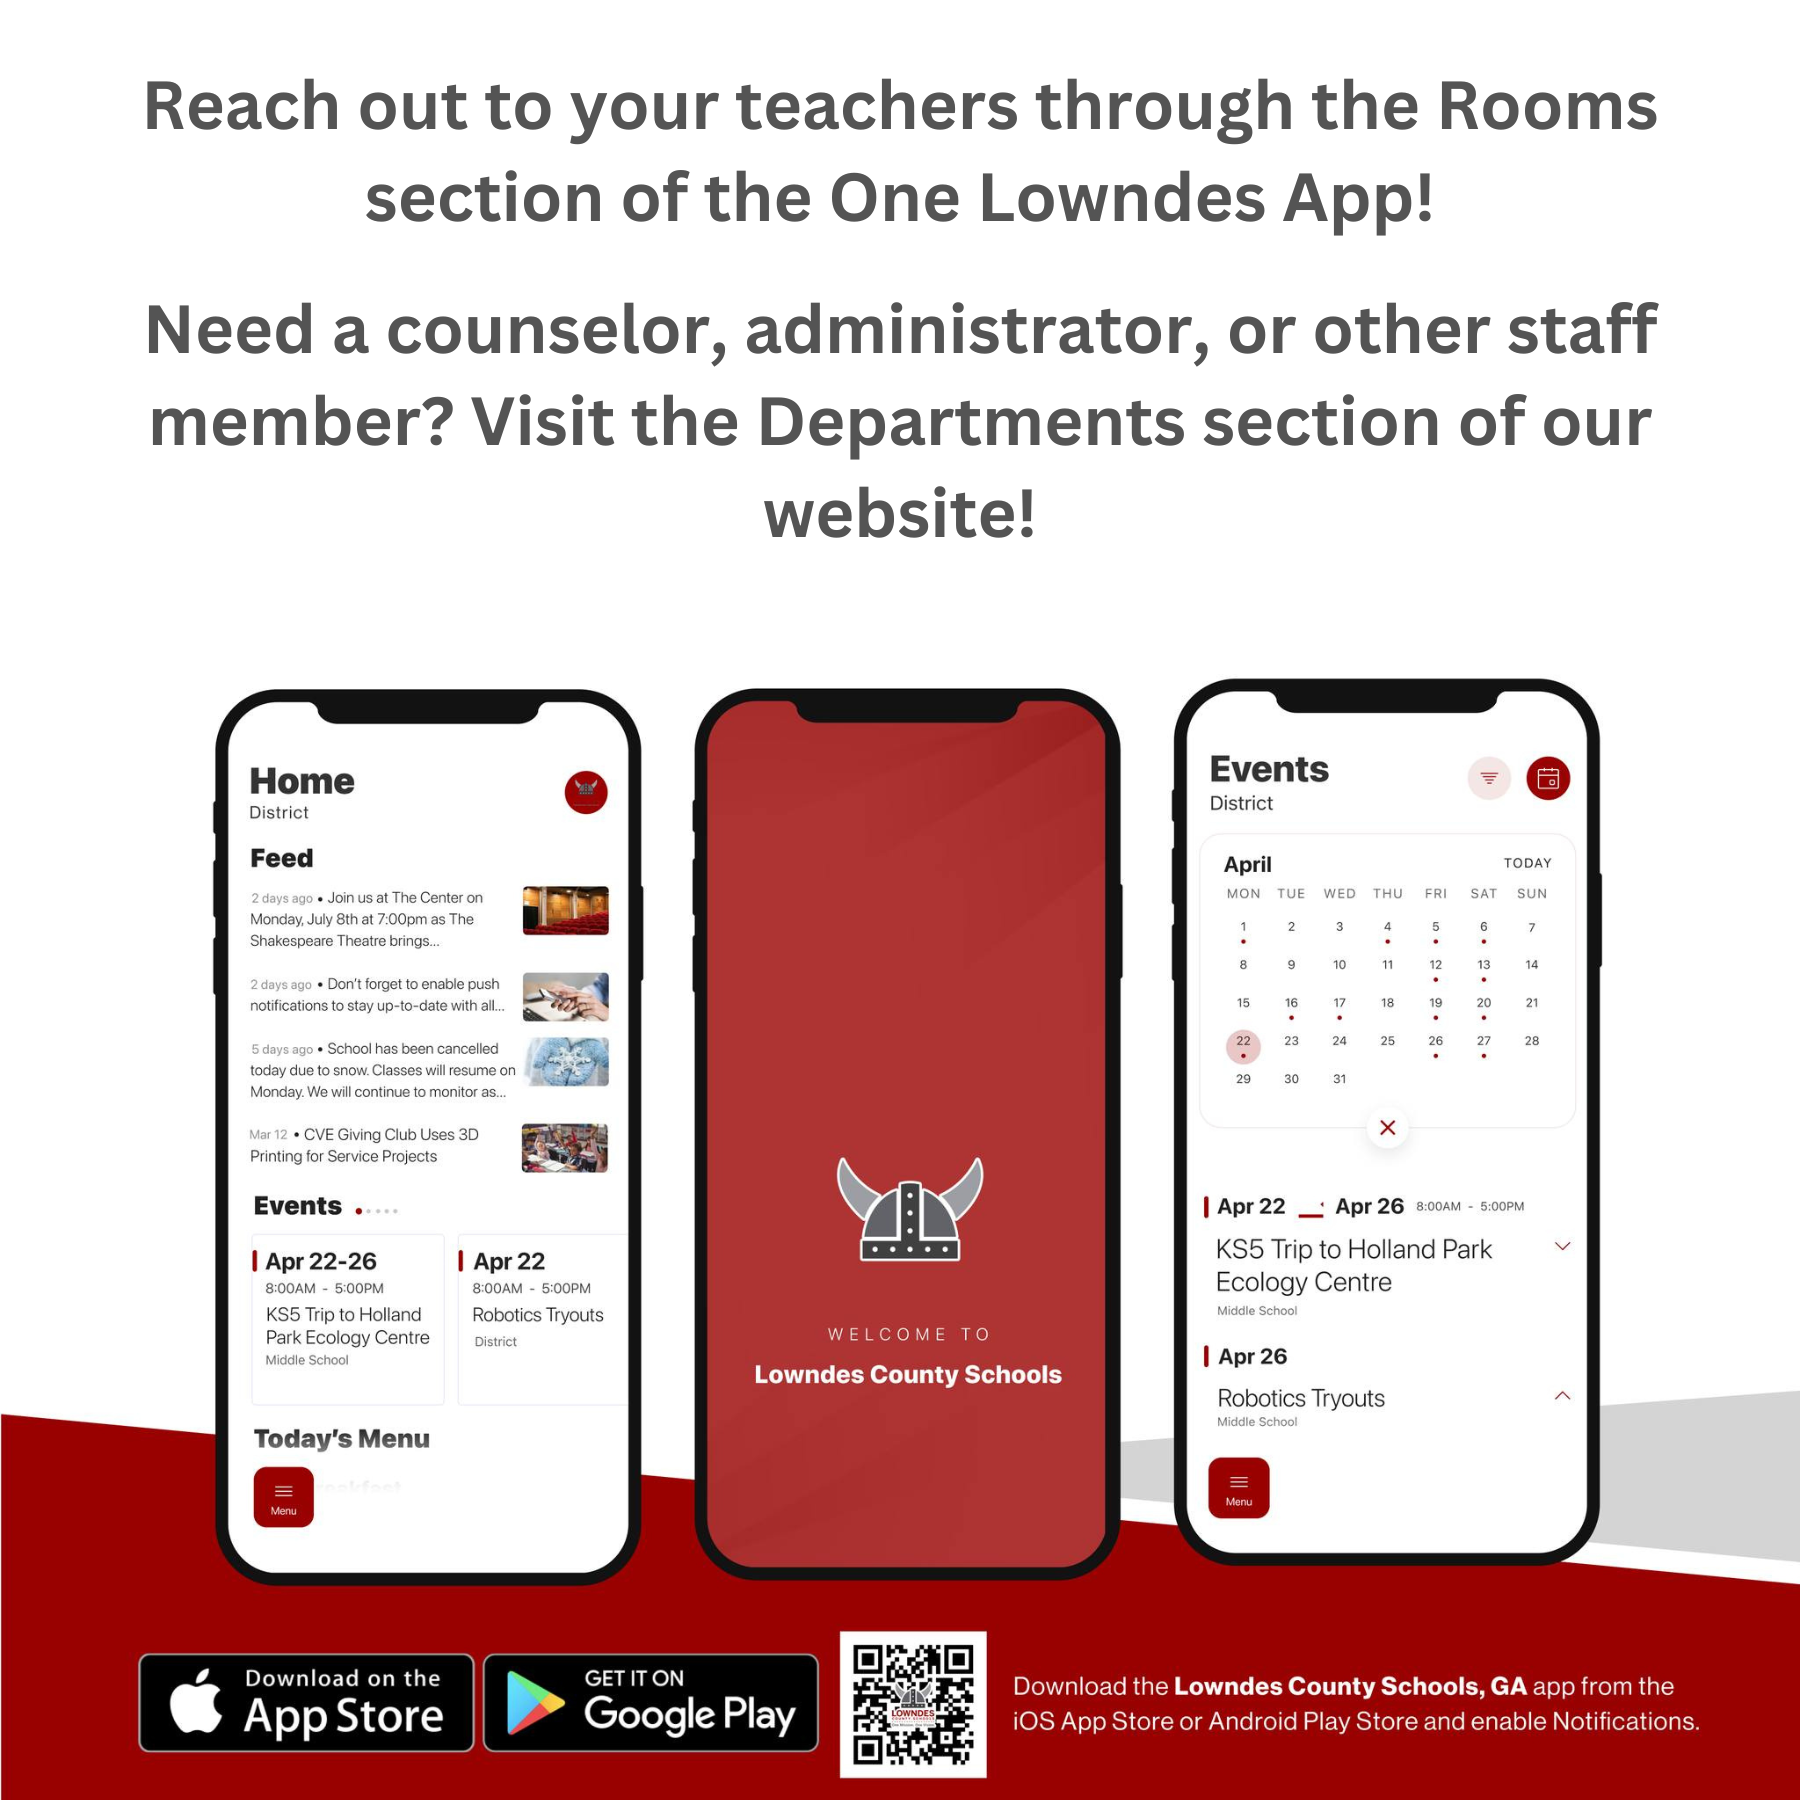 Reach out to your teachers through the Rooms section of the One Lowndes App. 